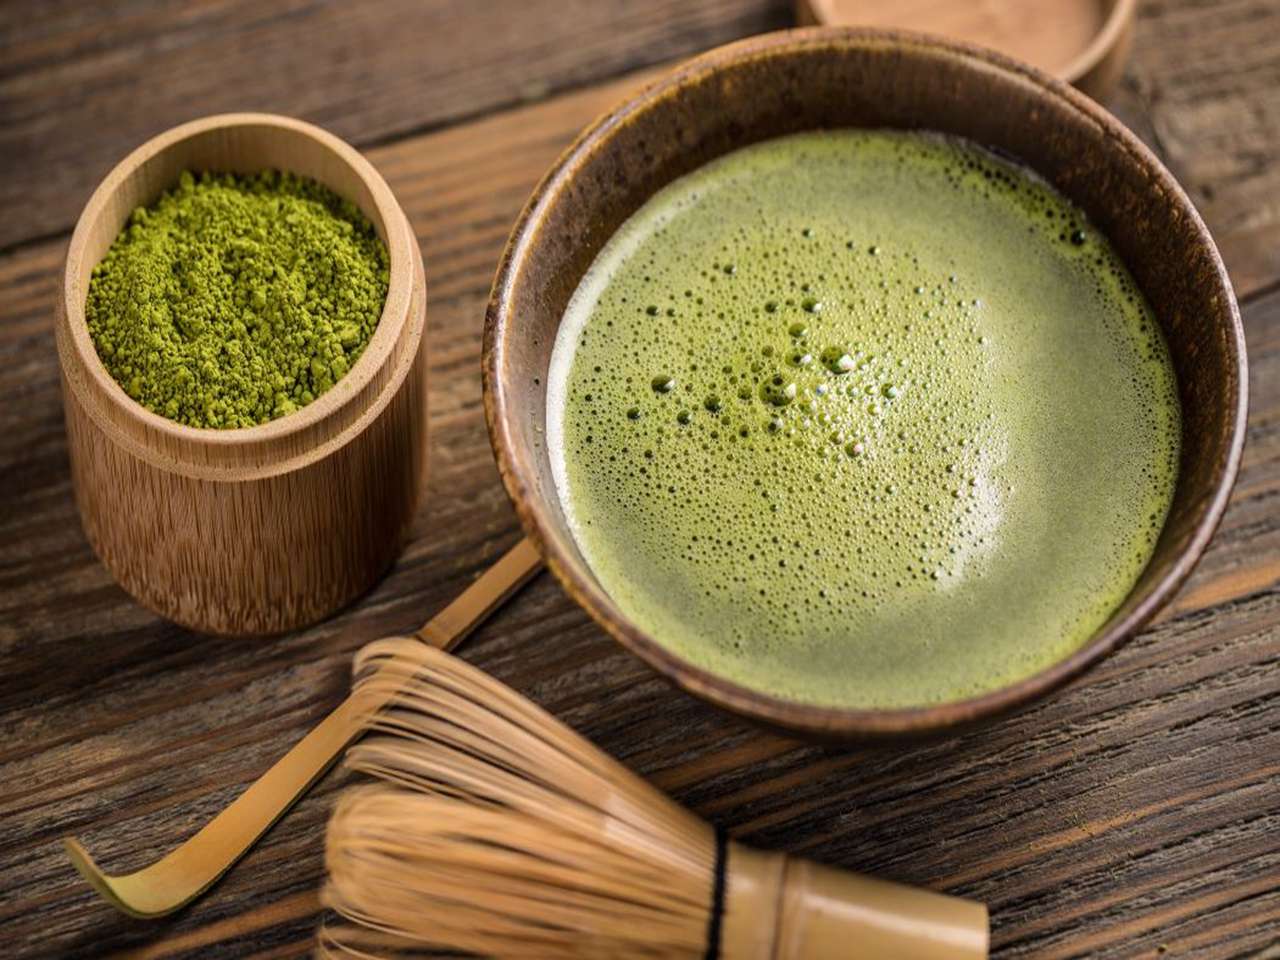 How much matcha tea powder should be added when you drink